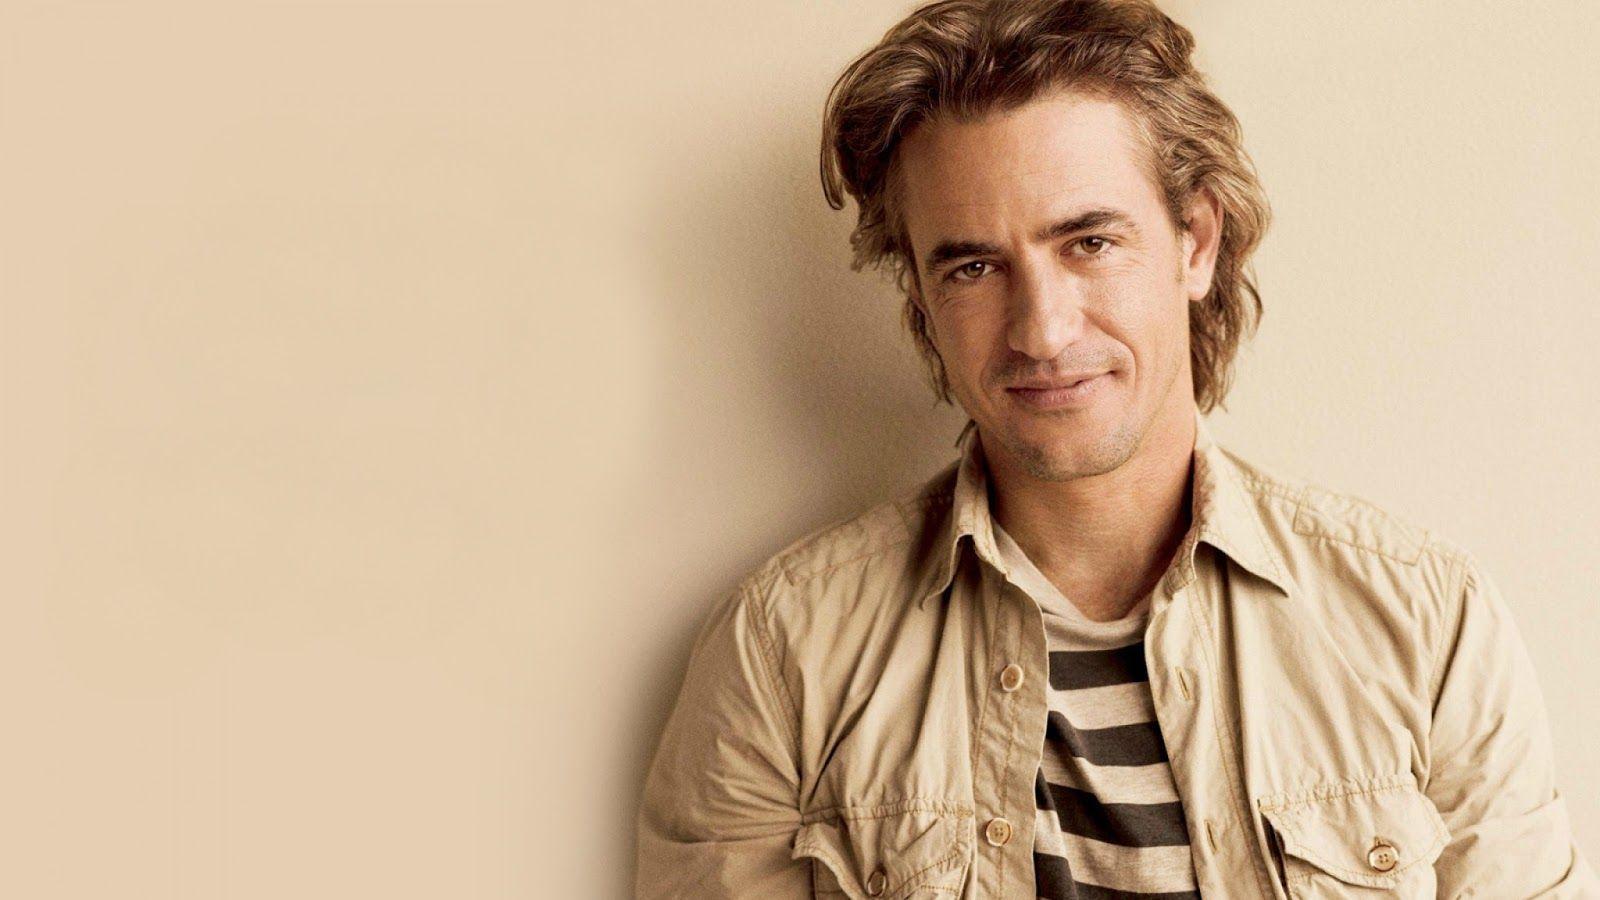 Dermot Mulroney All Upcoming Movies List 2017 With Release